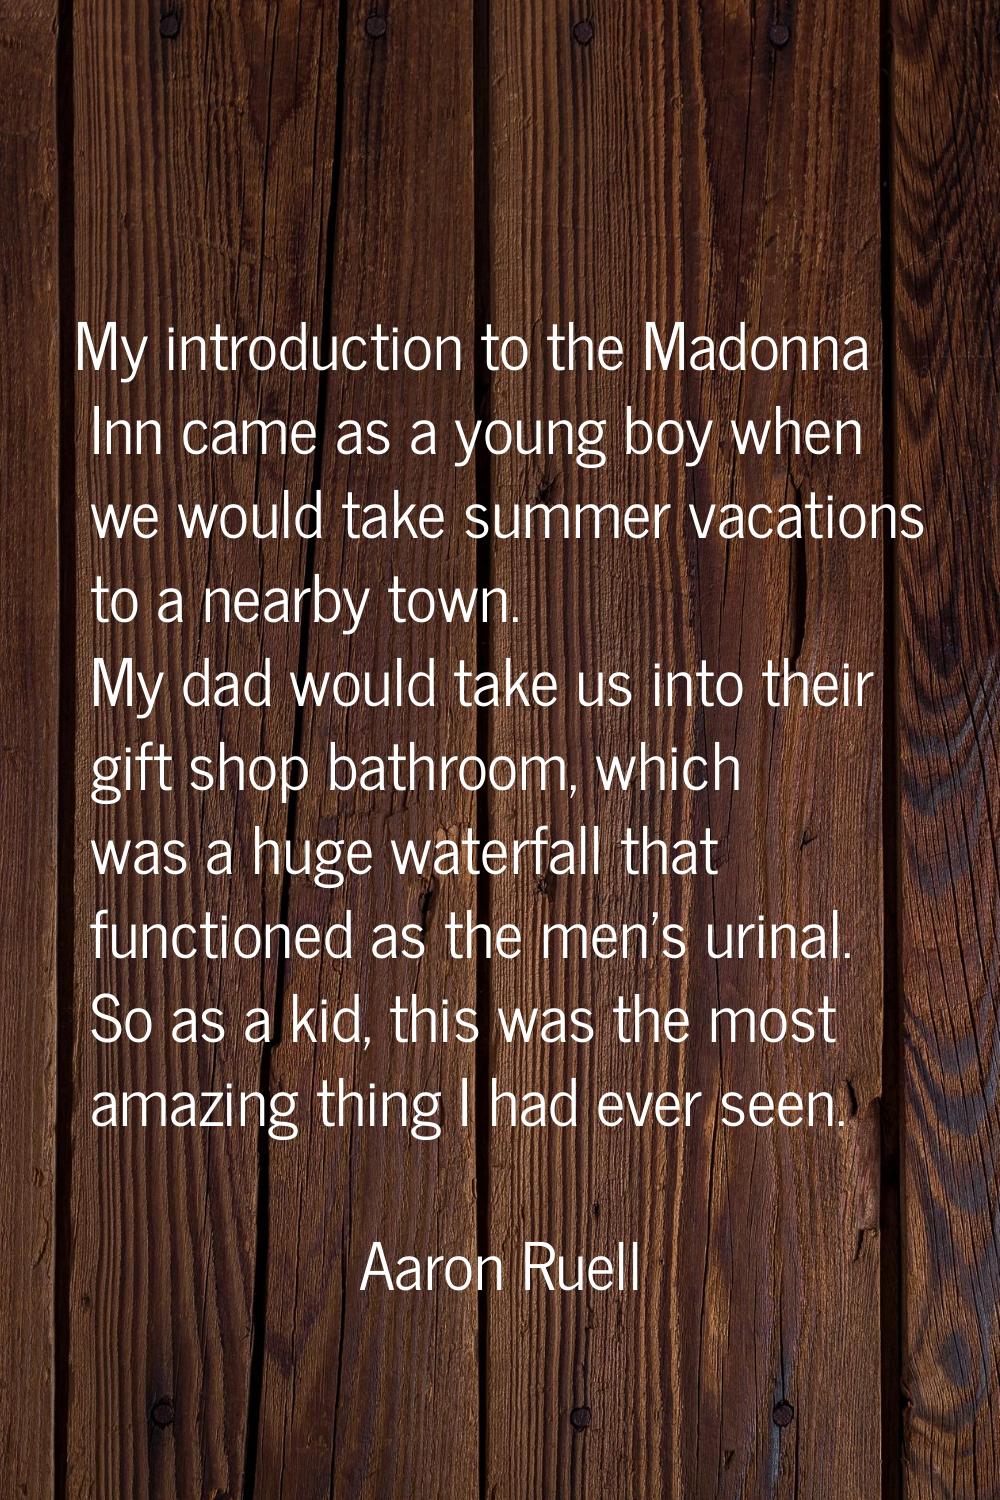 My introduction to the Madonna Inn came as a young boy when we would take summer vacations to a nea